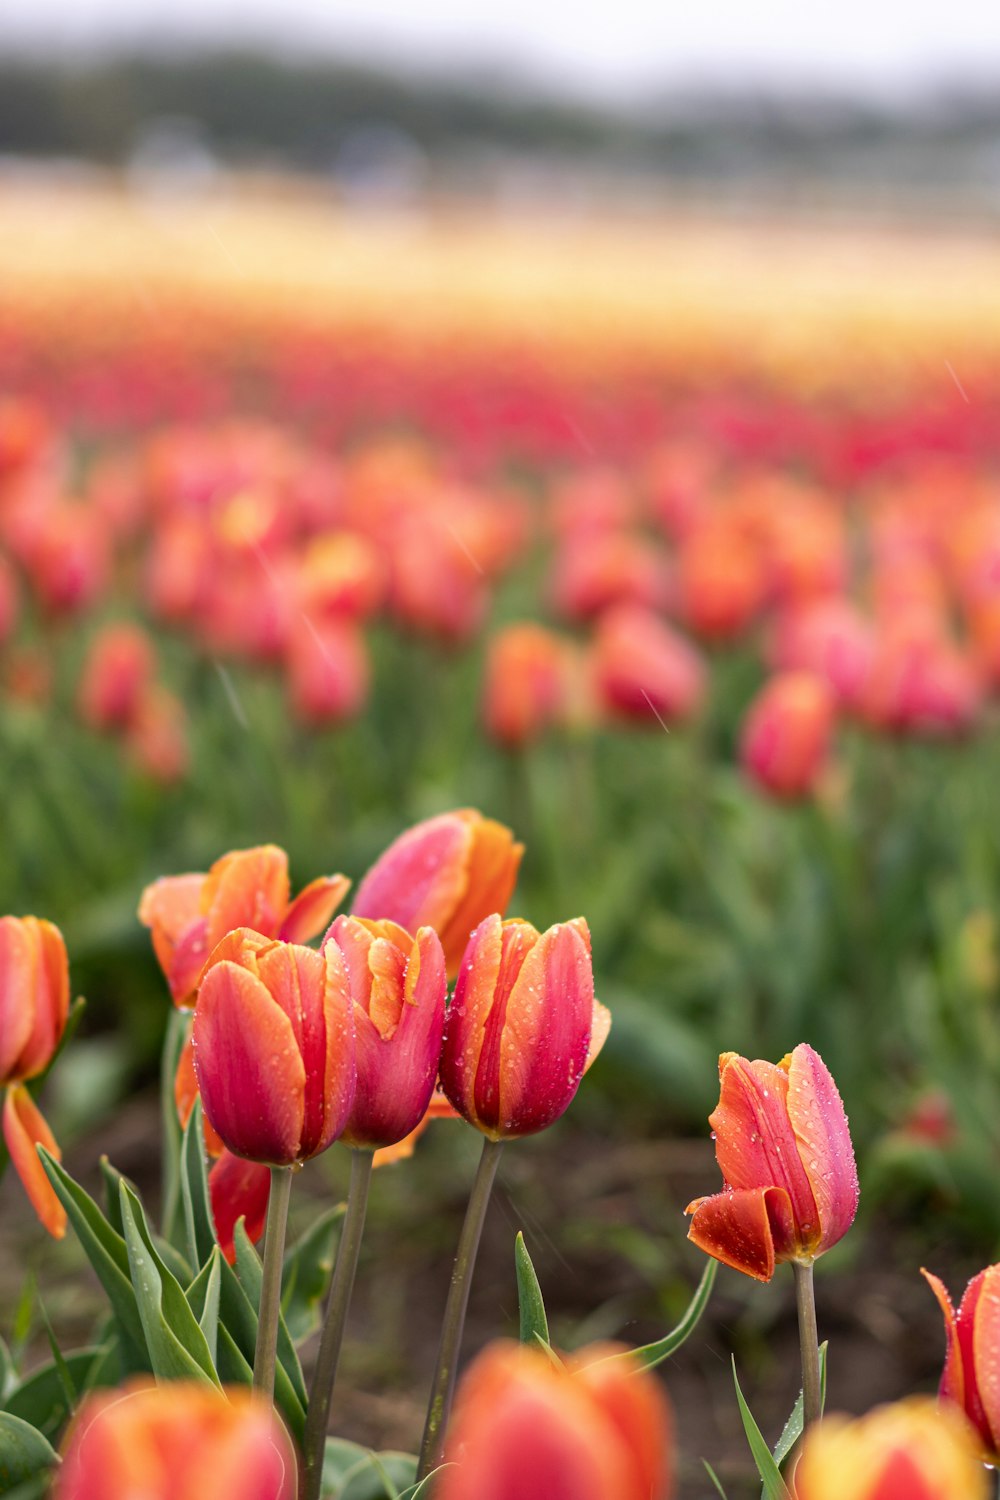 a field full of red and yellow tulips